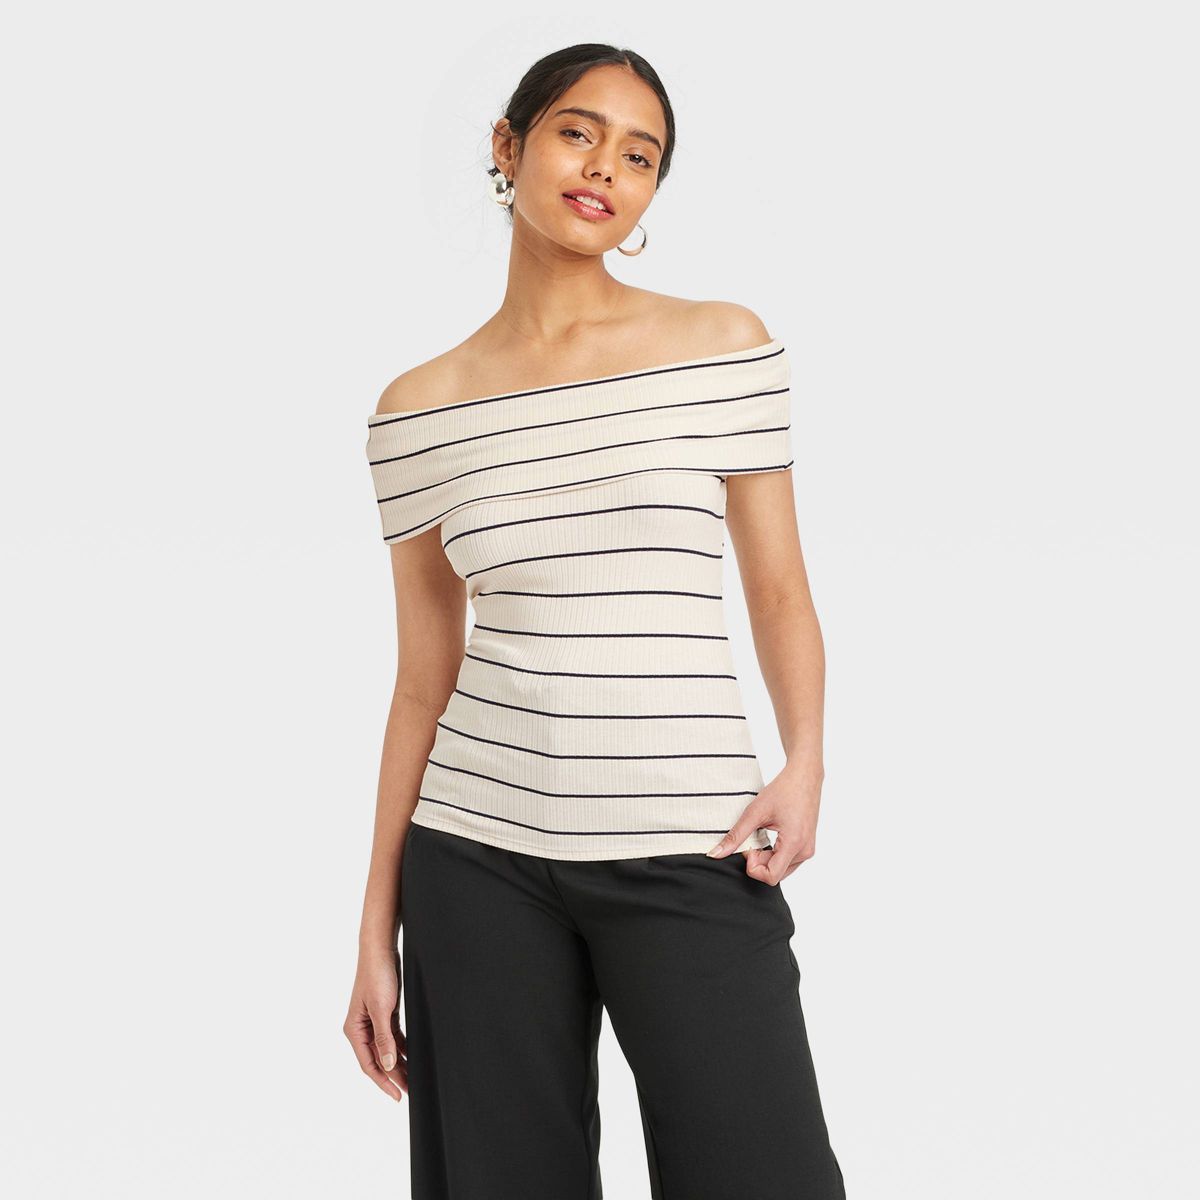 Women's Slim Fit Short Sleeve Off the Shoulder Top - A New Day™ White/Navy Striped XS | Target